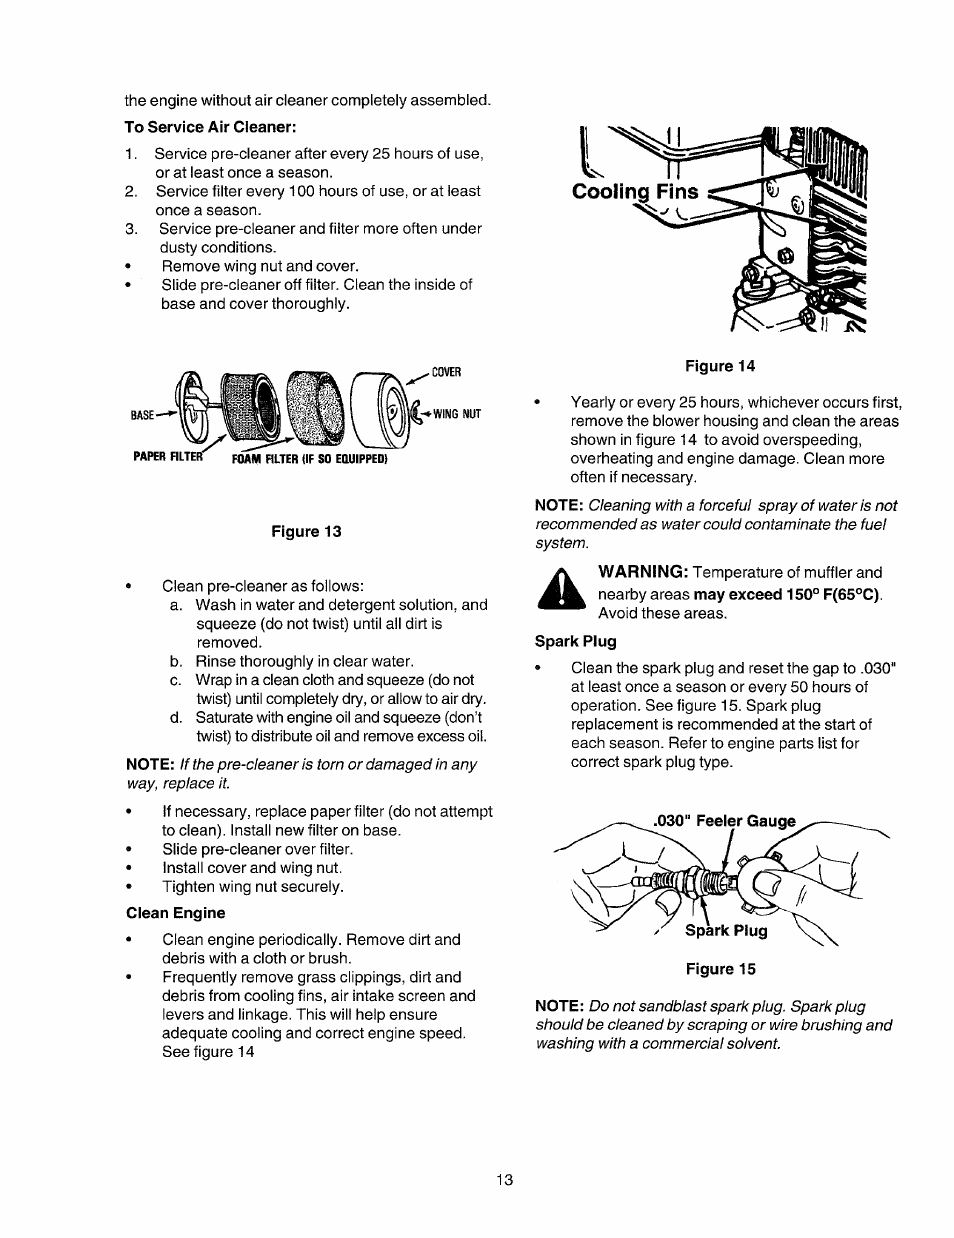 To service air cleaner, Cooling fins | Craftsman 247.775860 User Manual | Page 13 / 46